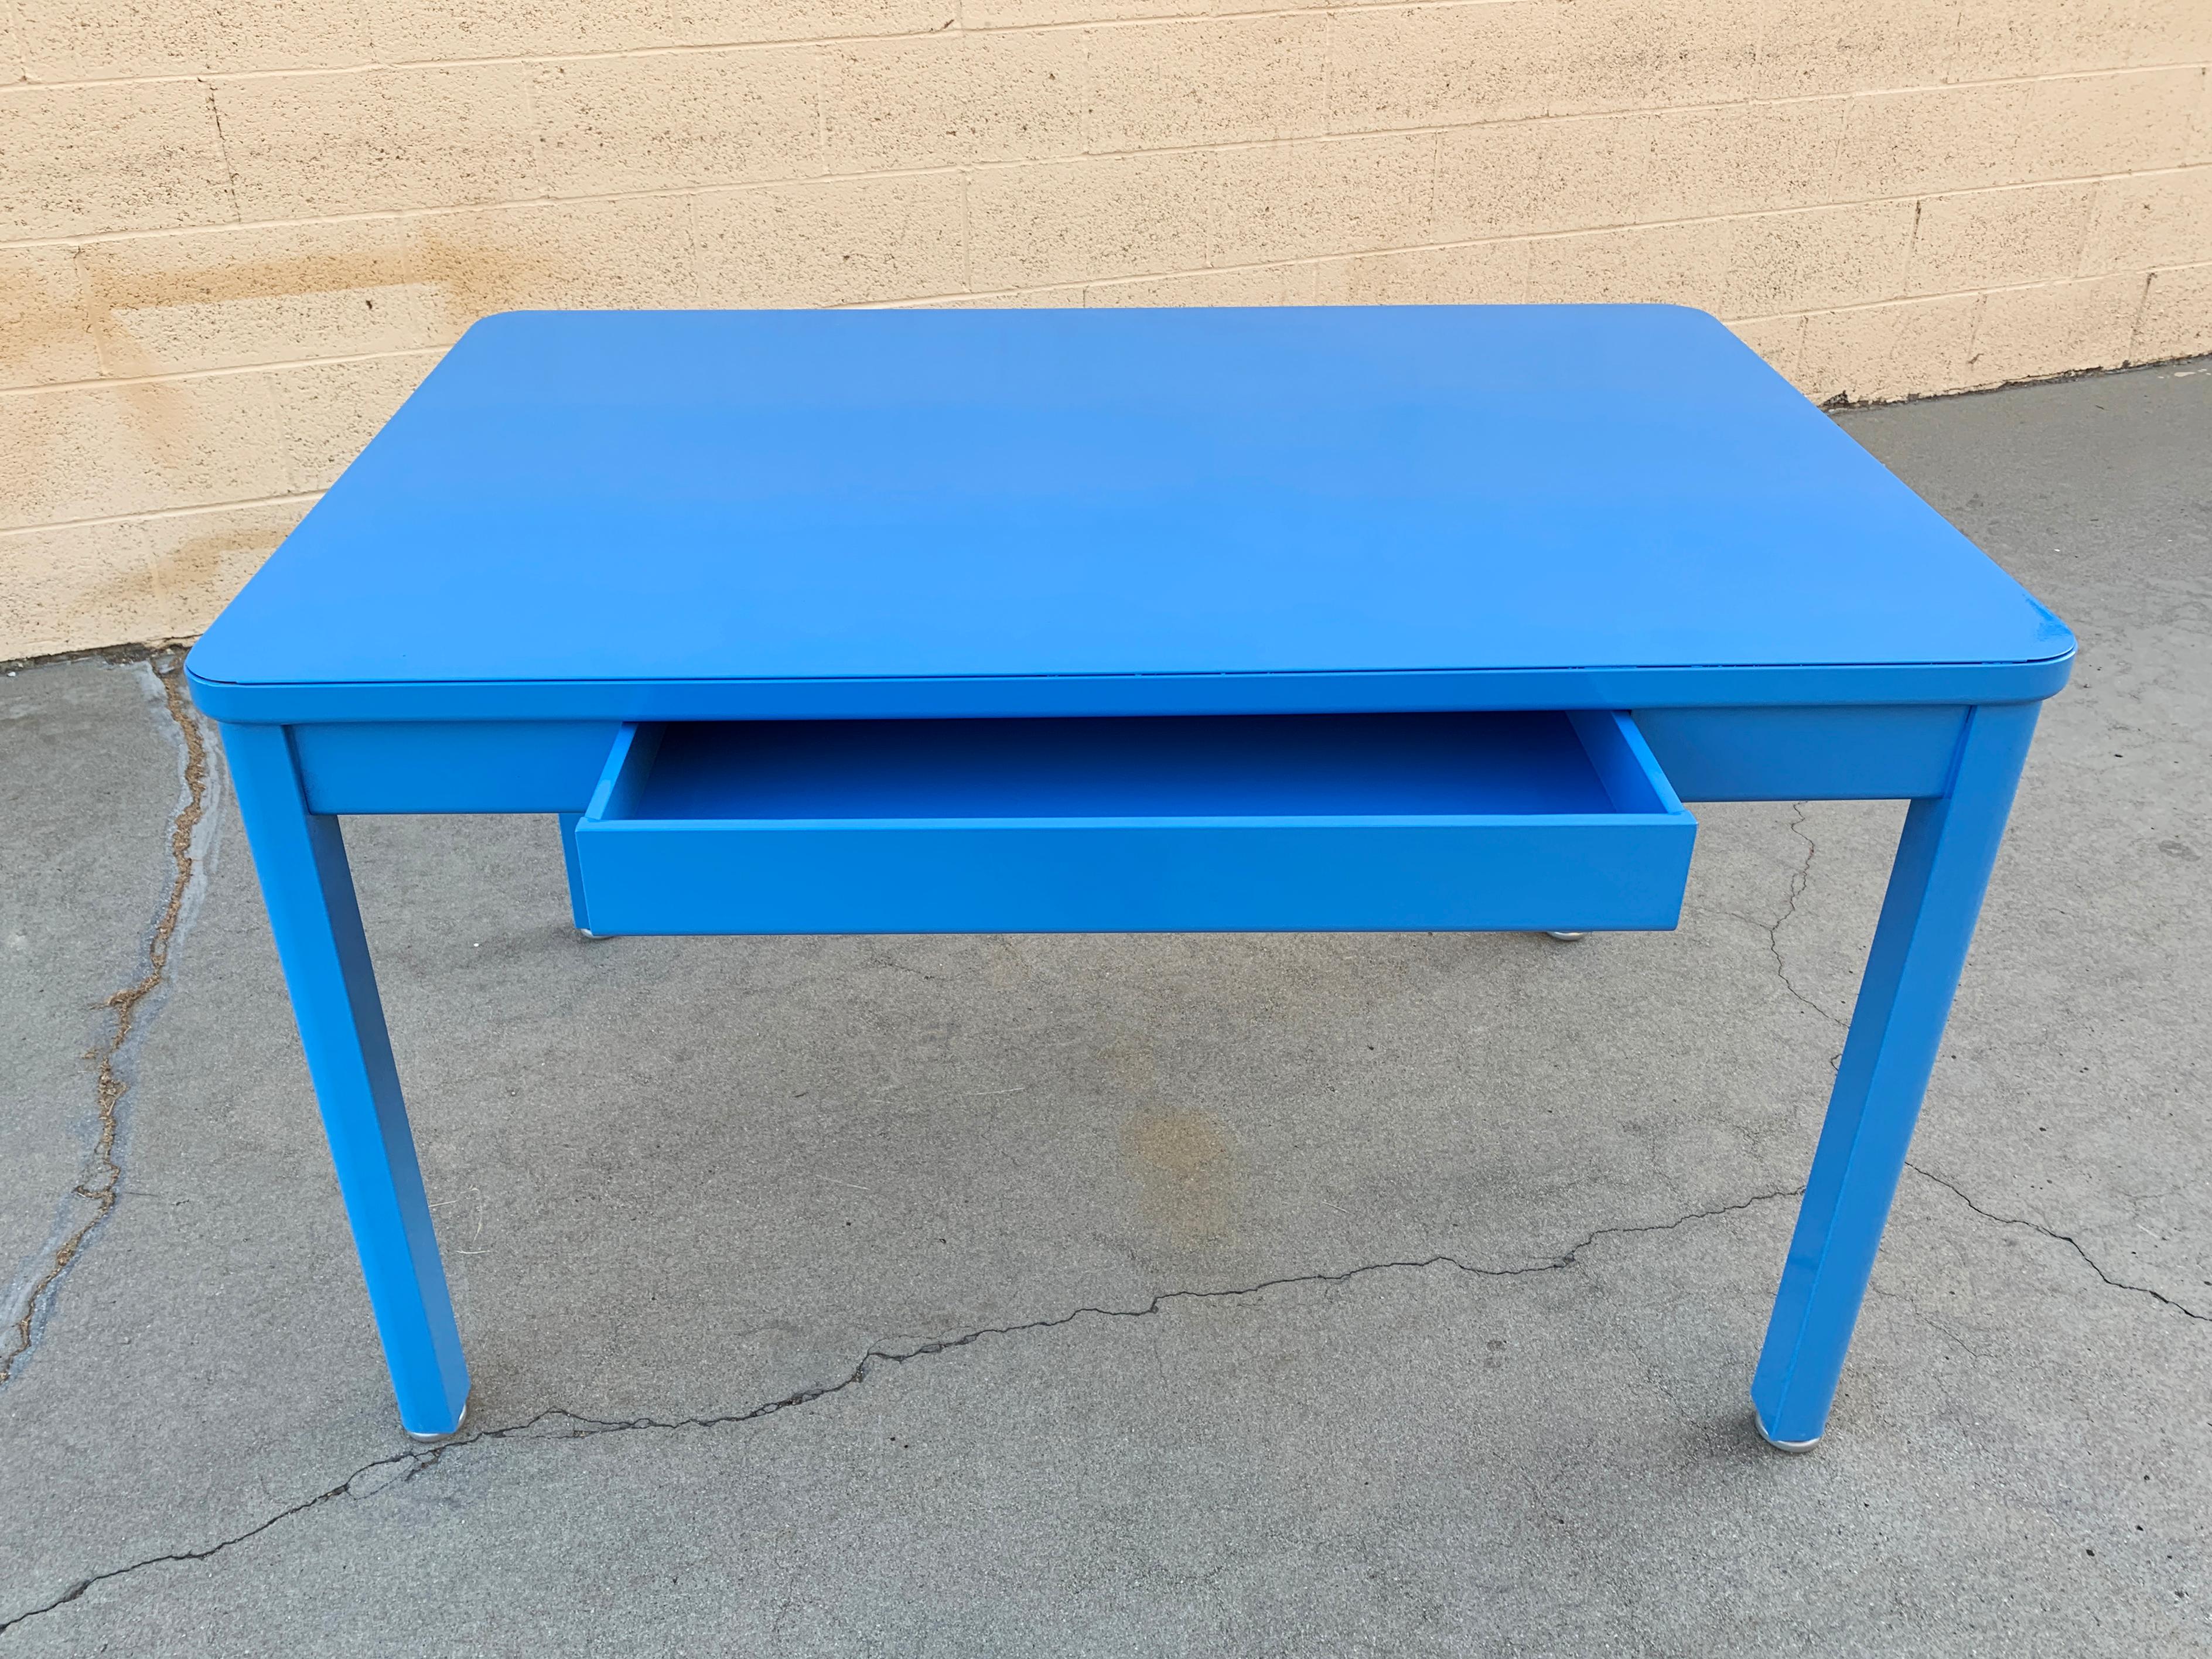 Powder-Coated 1960s Tanker Table by Steelcase, Refinished in Bright Blue